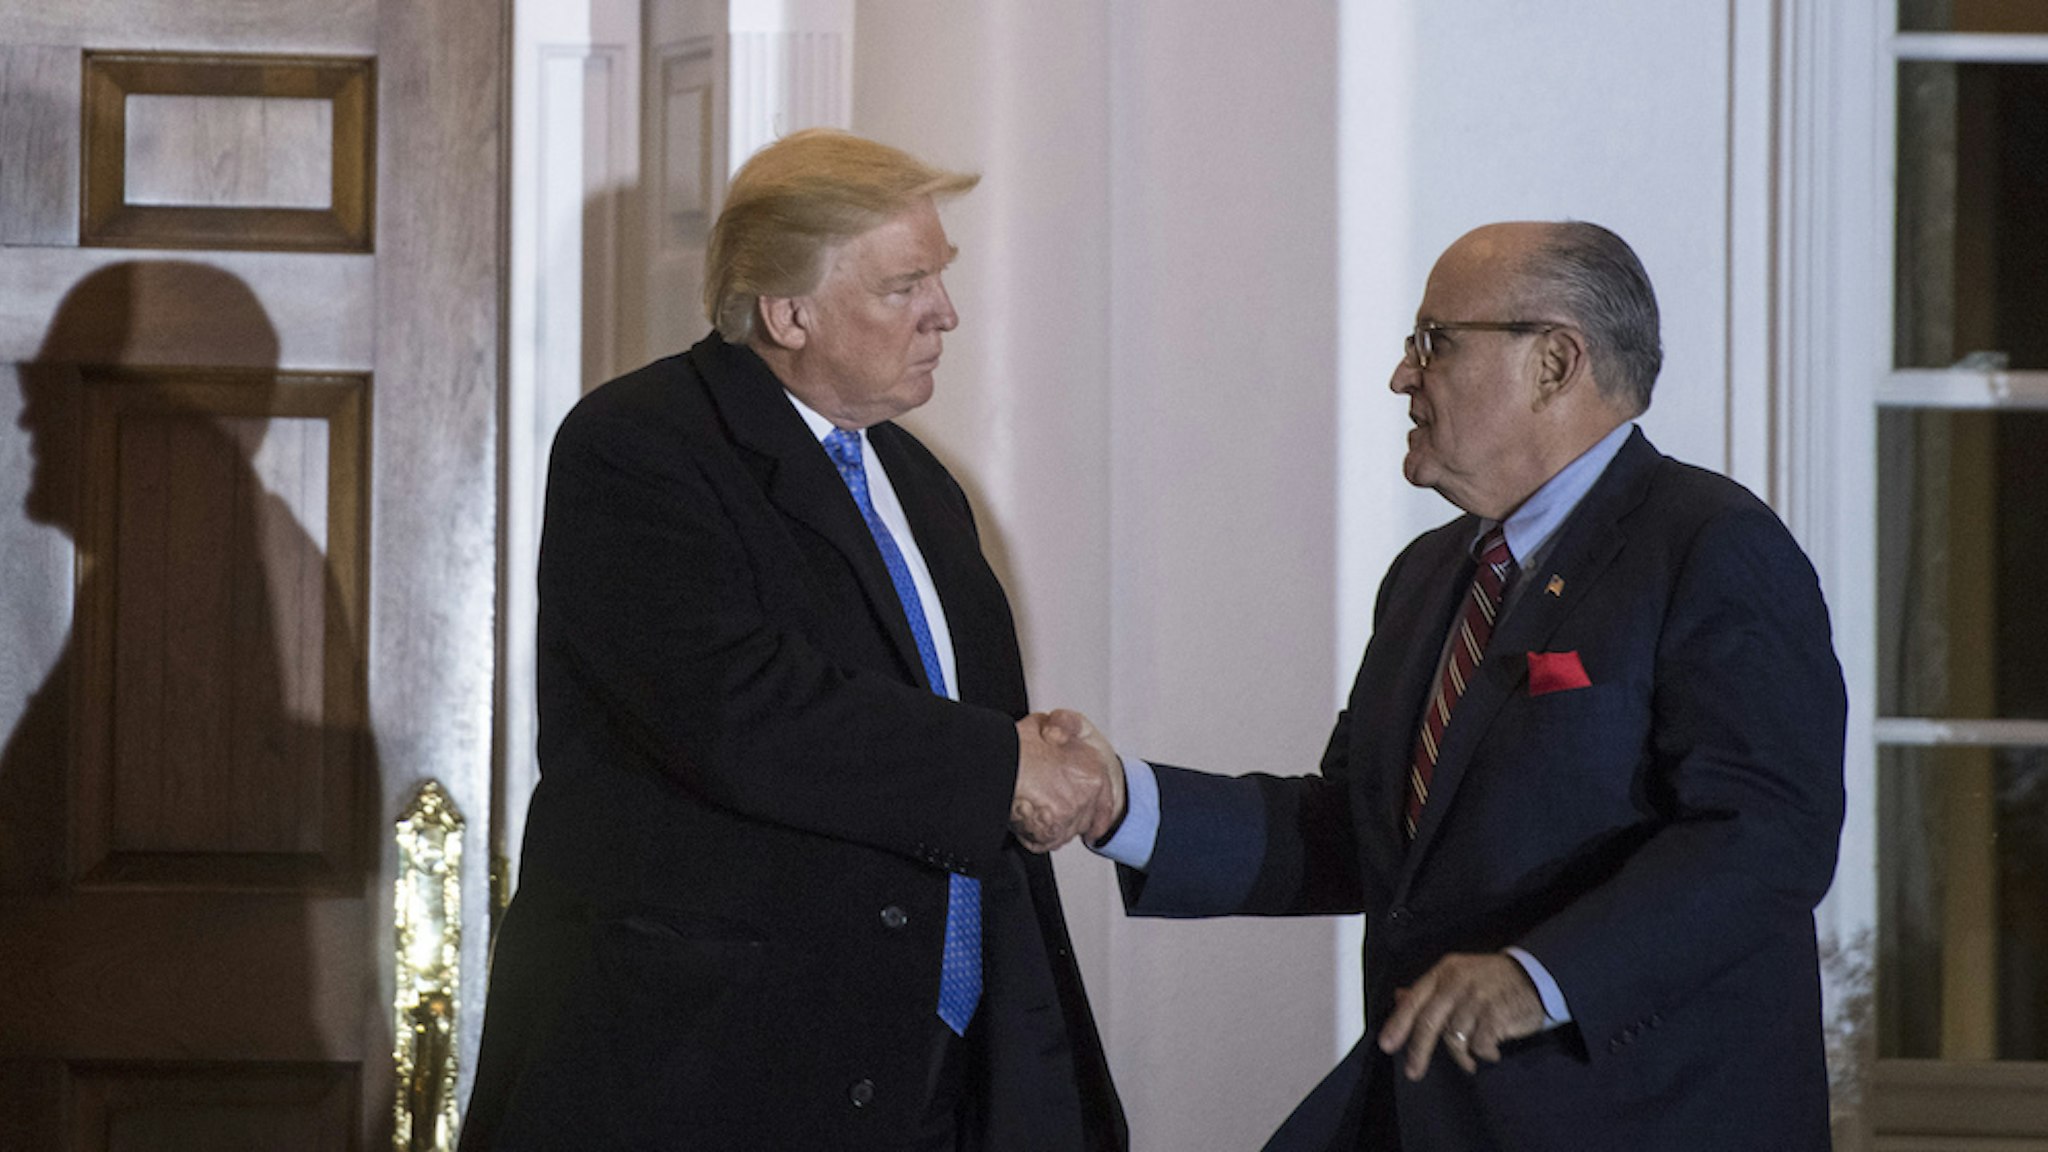 President-elect Donald Trump talks with Rudy Giuliani after a meeting at the clubhouse at Trump National Golf Club Bedminster in Bedminster Township, N.J. on Sunday, Nov. 20, 2016. (Photo by Jabin Botsford/The Washington Post via Getty Images)